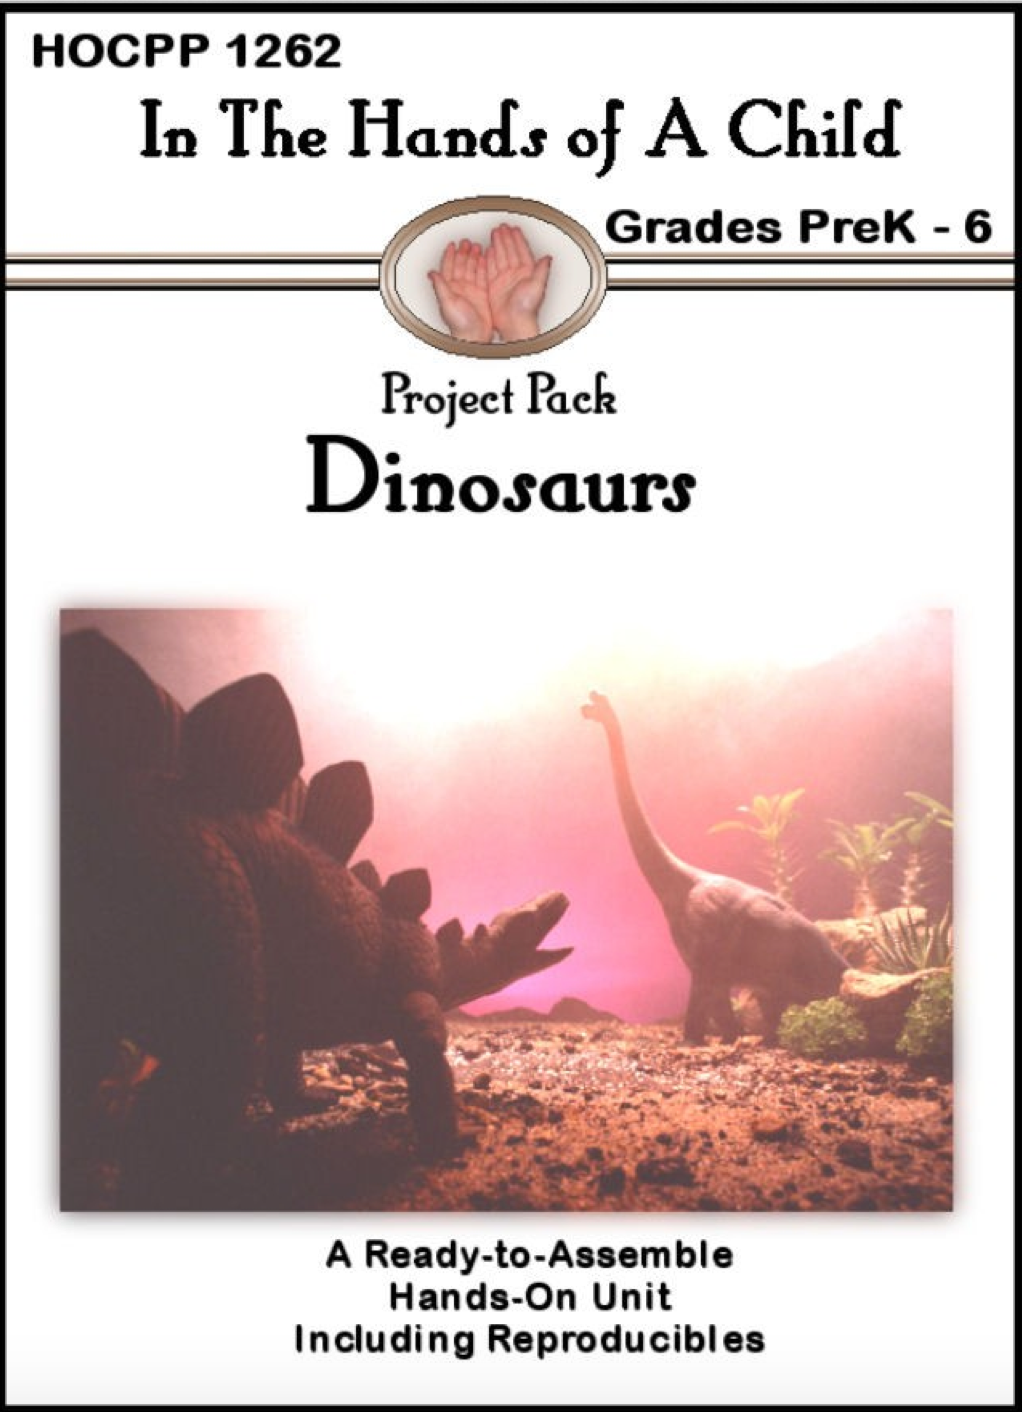 Hands of a Child Dinosaur project pack PK-6